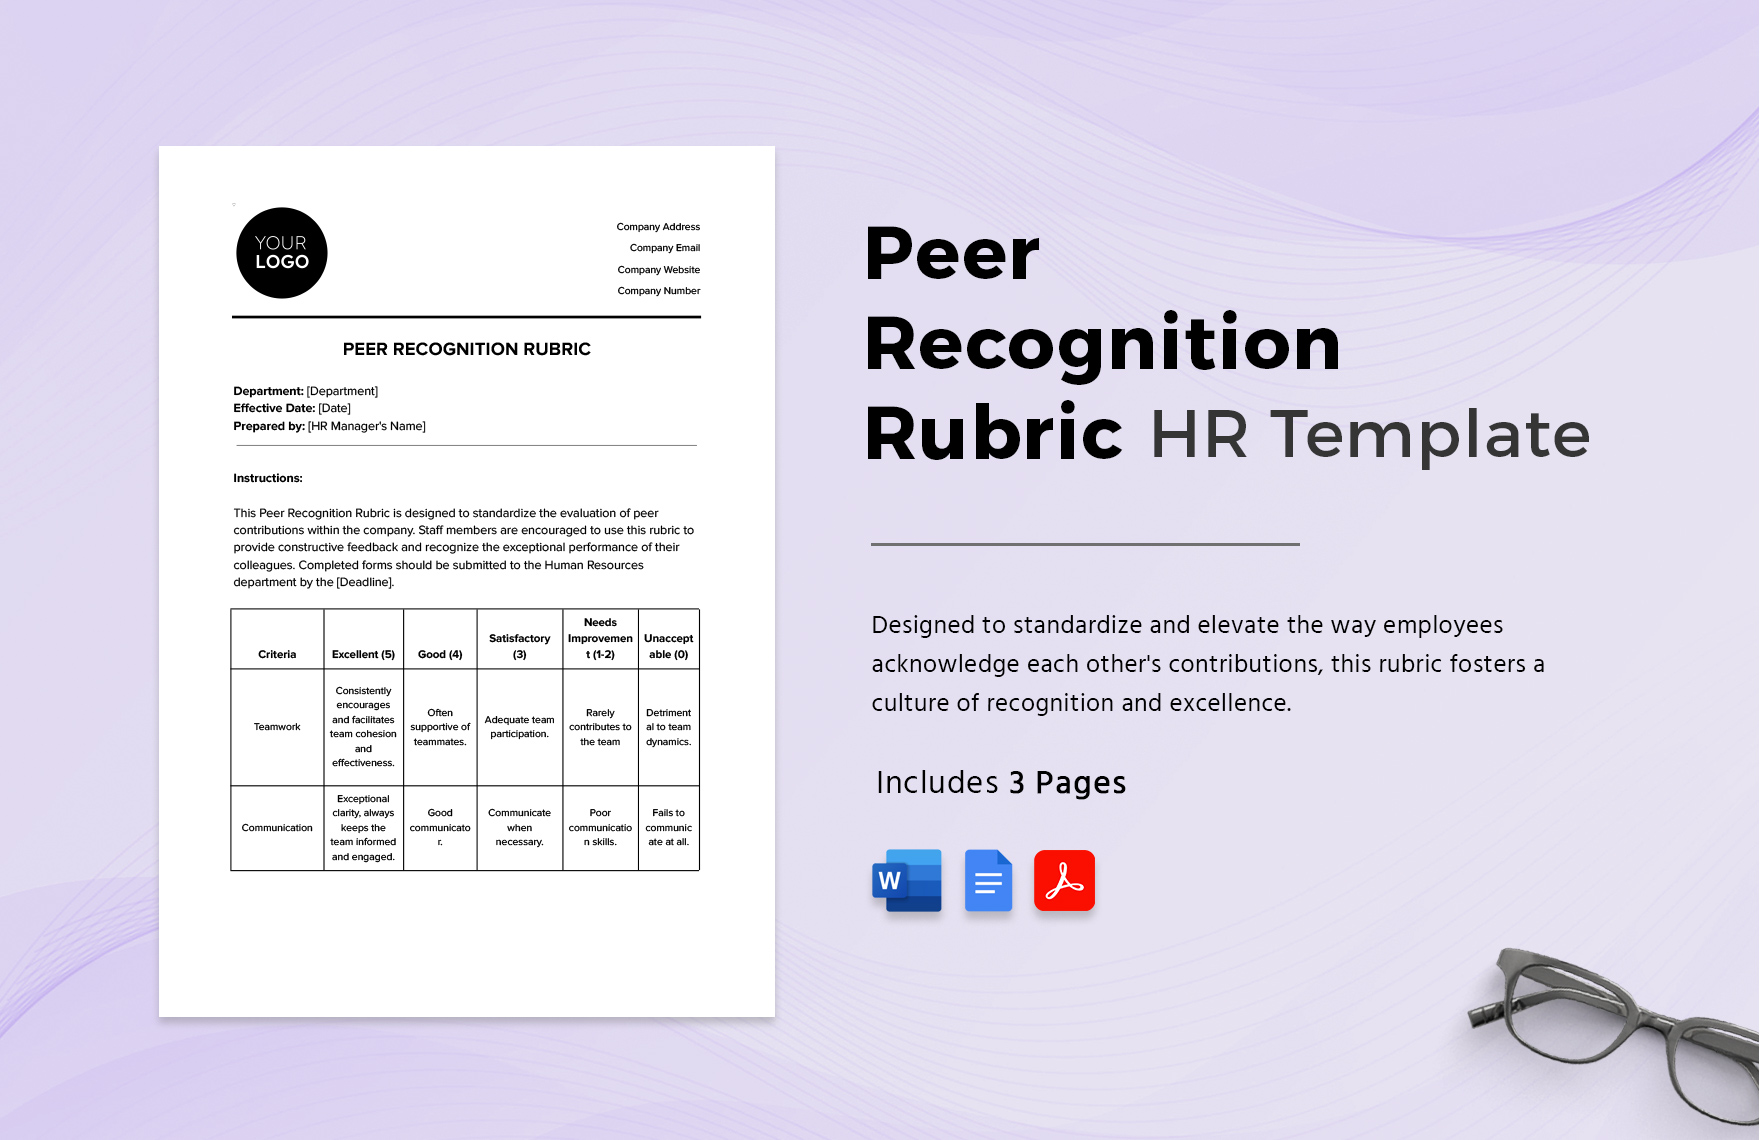 Peer Recognition Rubric HR Template in Word, Google Docs, PDF